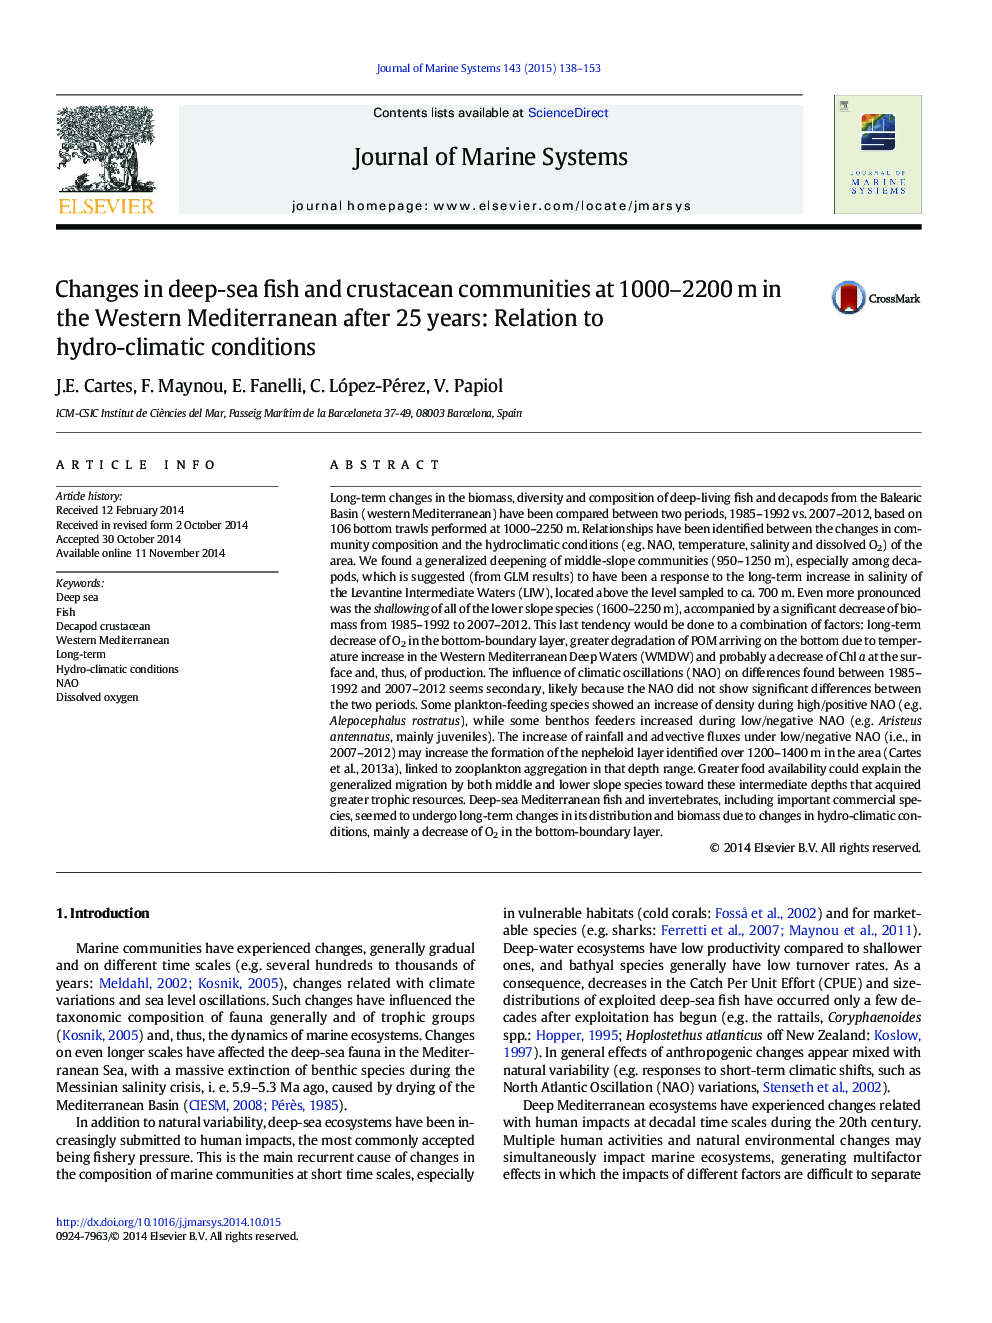 Changes in deep-sea fish and crustacean communities at 1000-2200Â m in the Western Mediterranean after 25Â years: Relation to hydro-climatic conditions